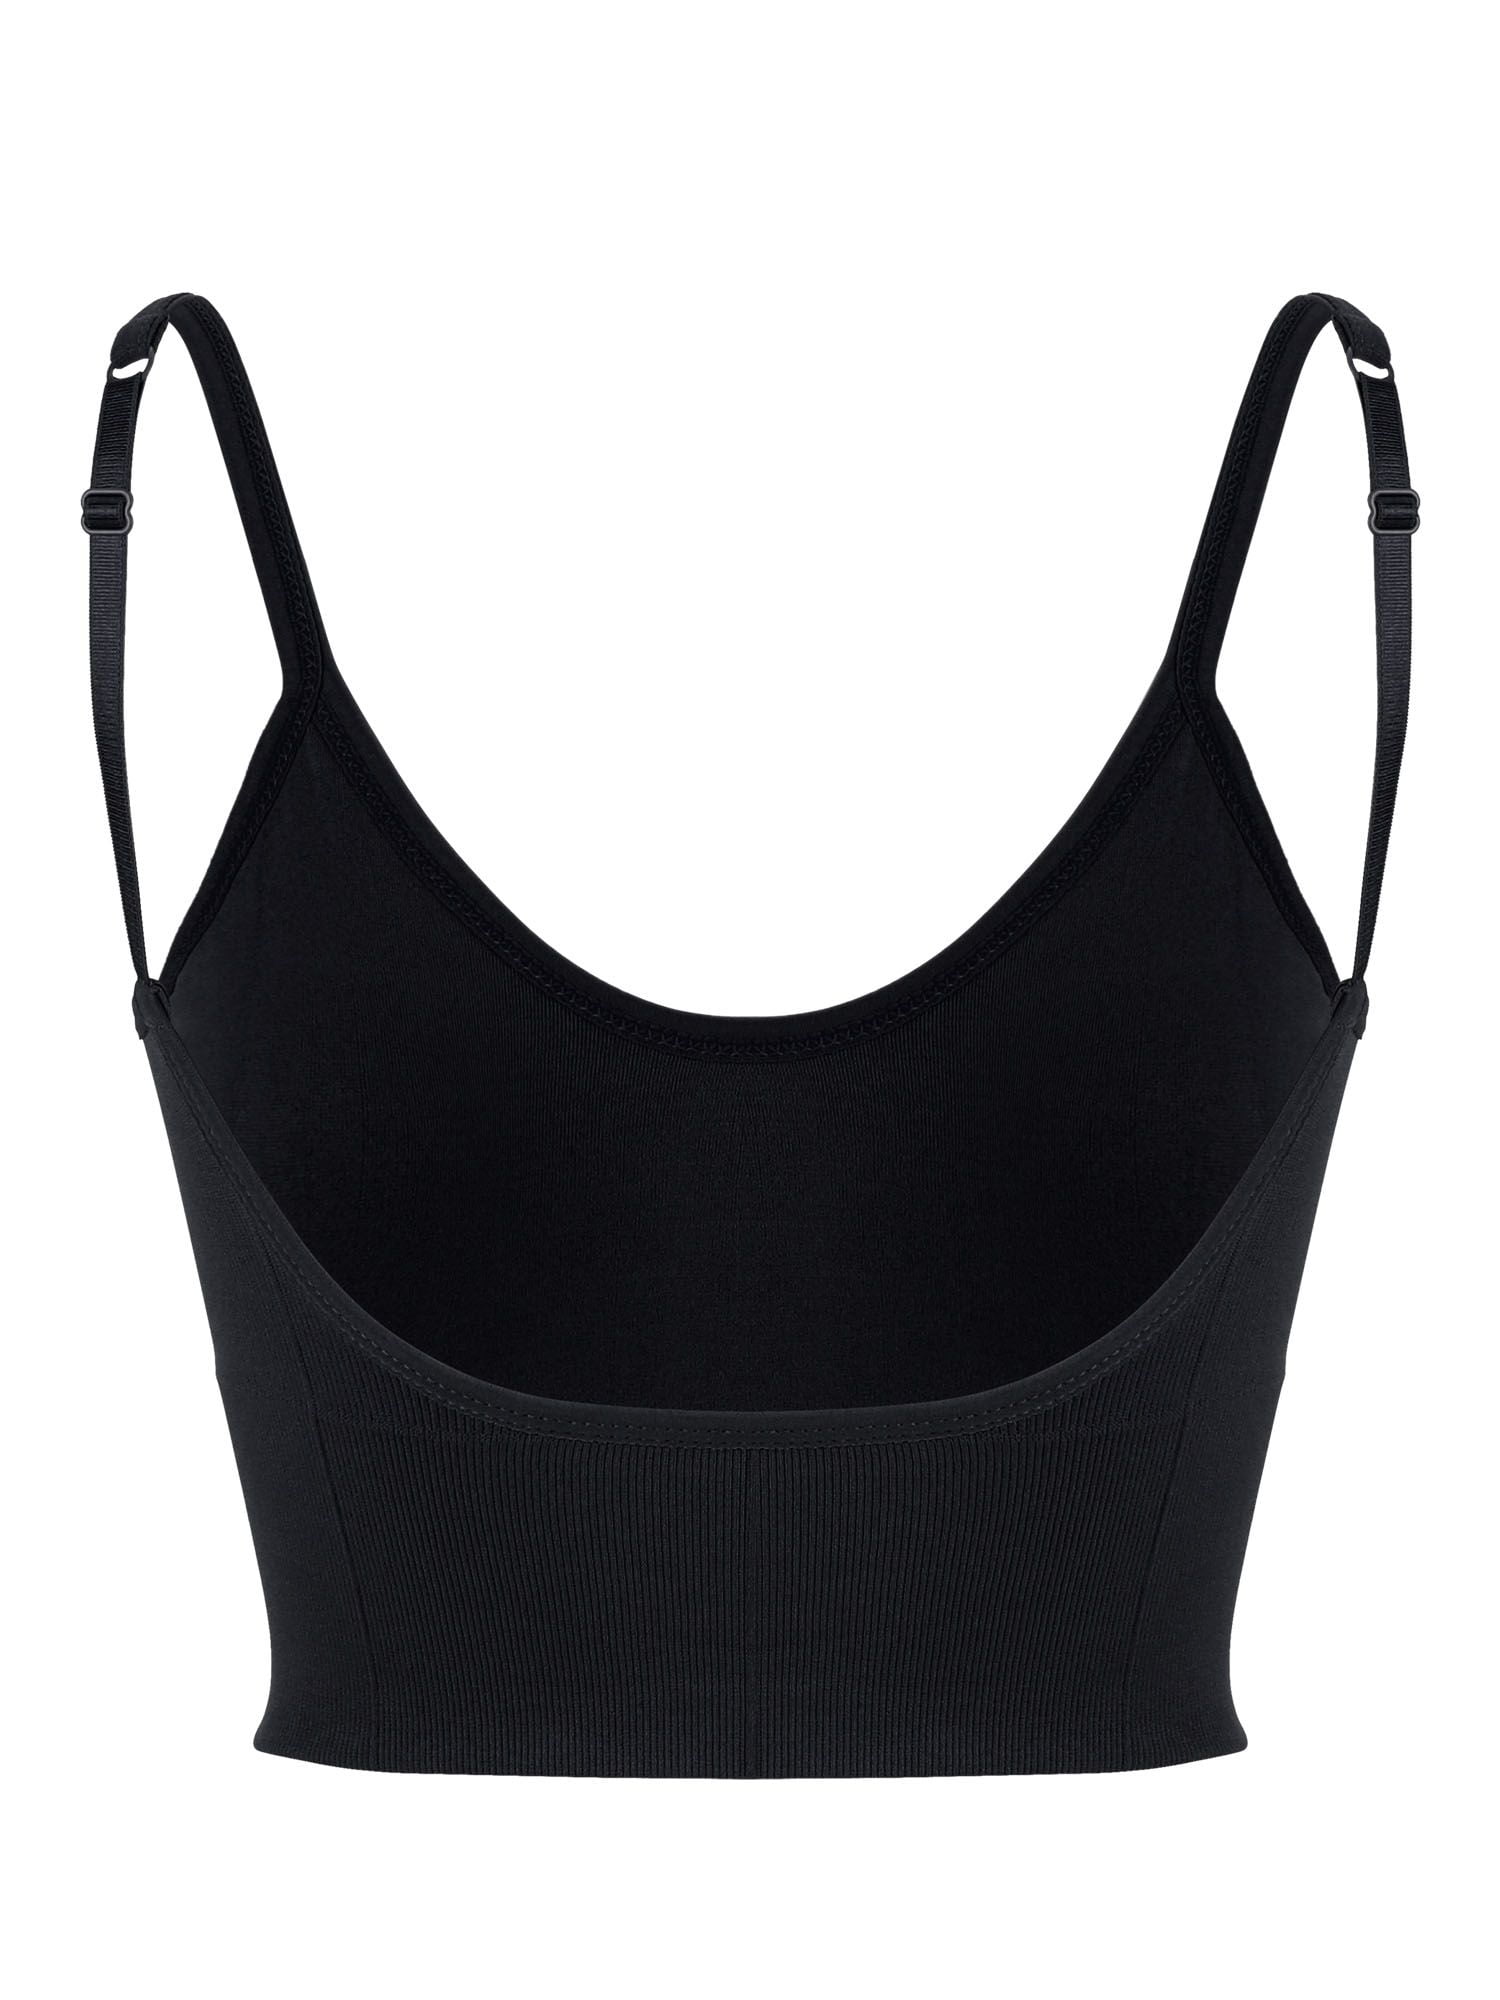 Officpb Comfy Push-Up Cami Bra for Womens Yoga Bralettes Longline